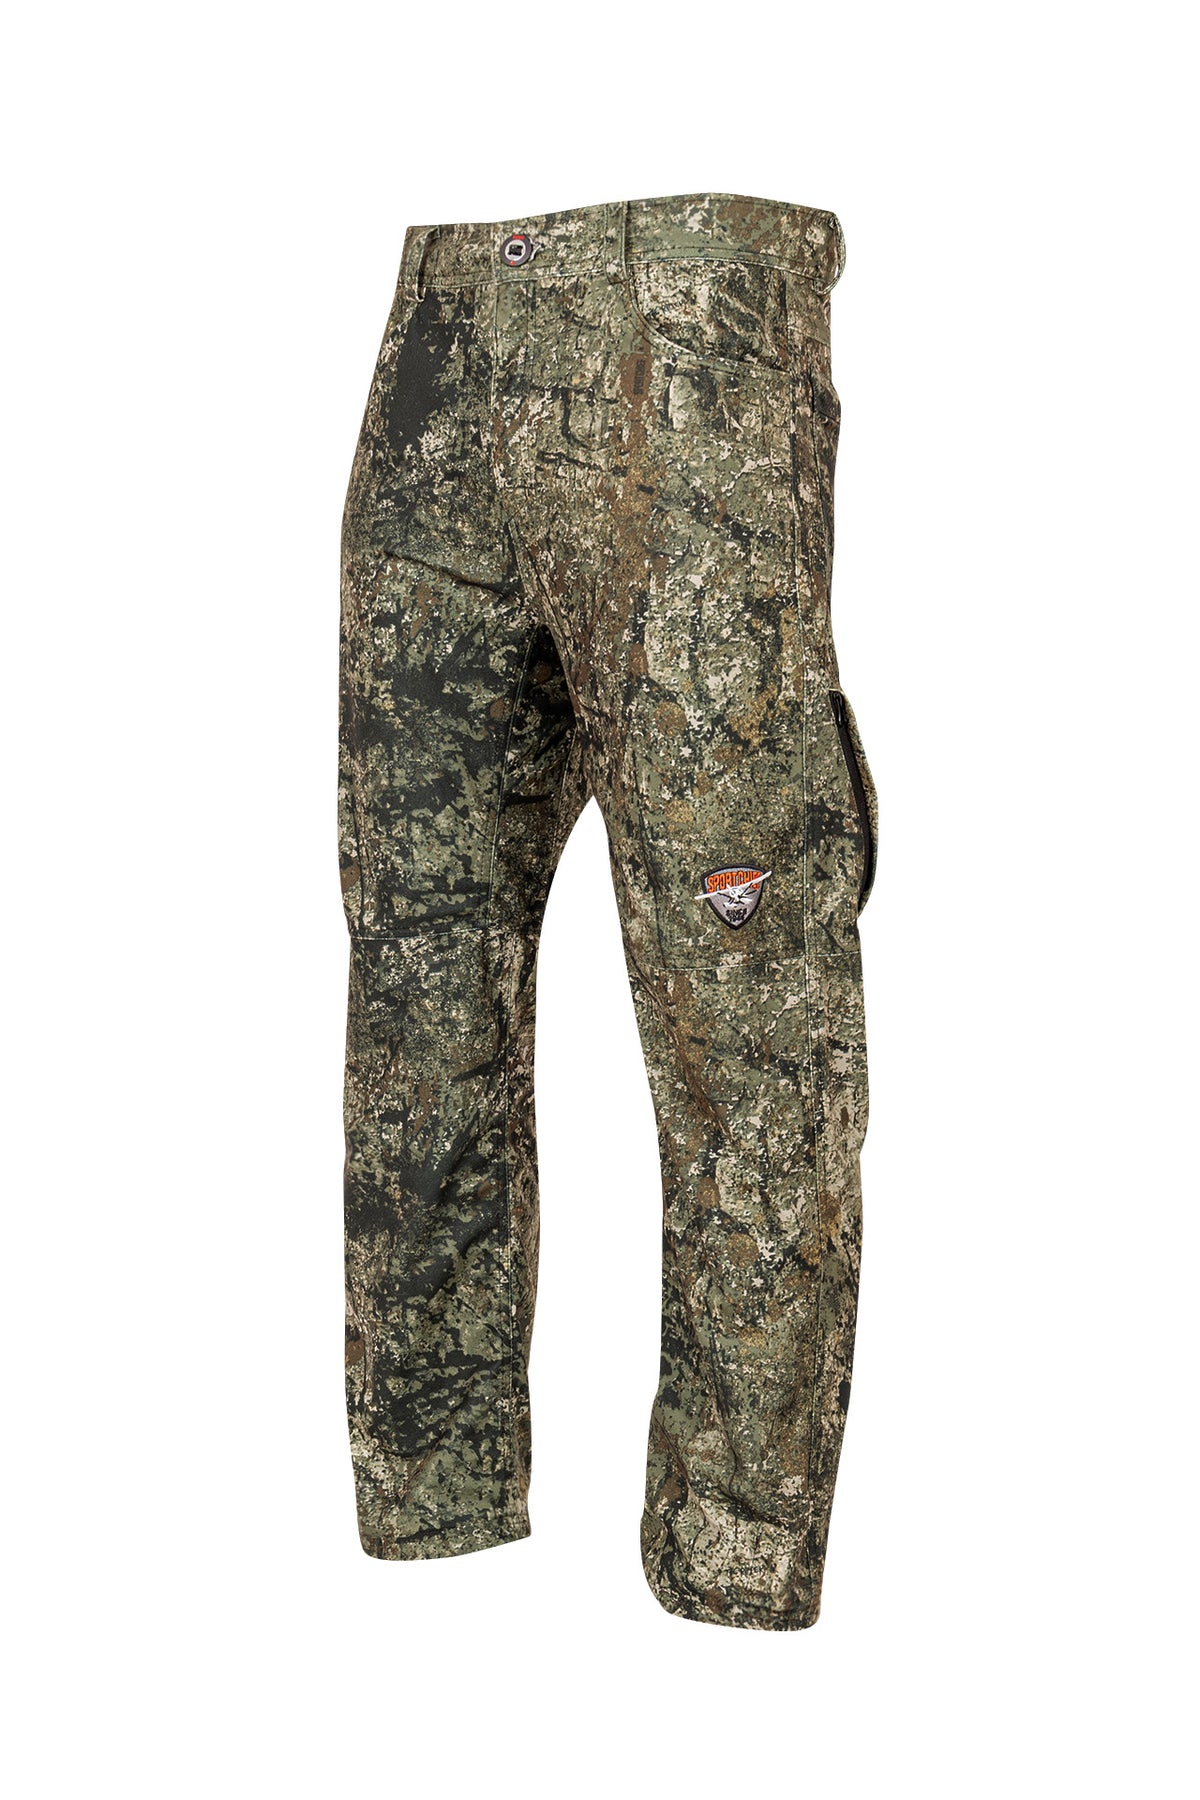 Heavy Duty hunting pants for men – Sportchief